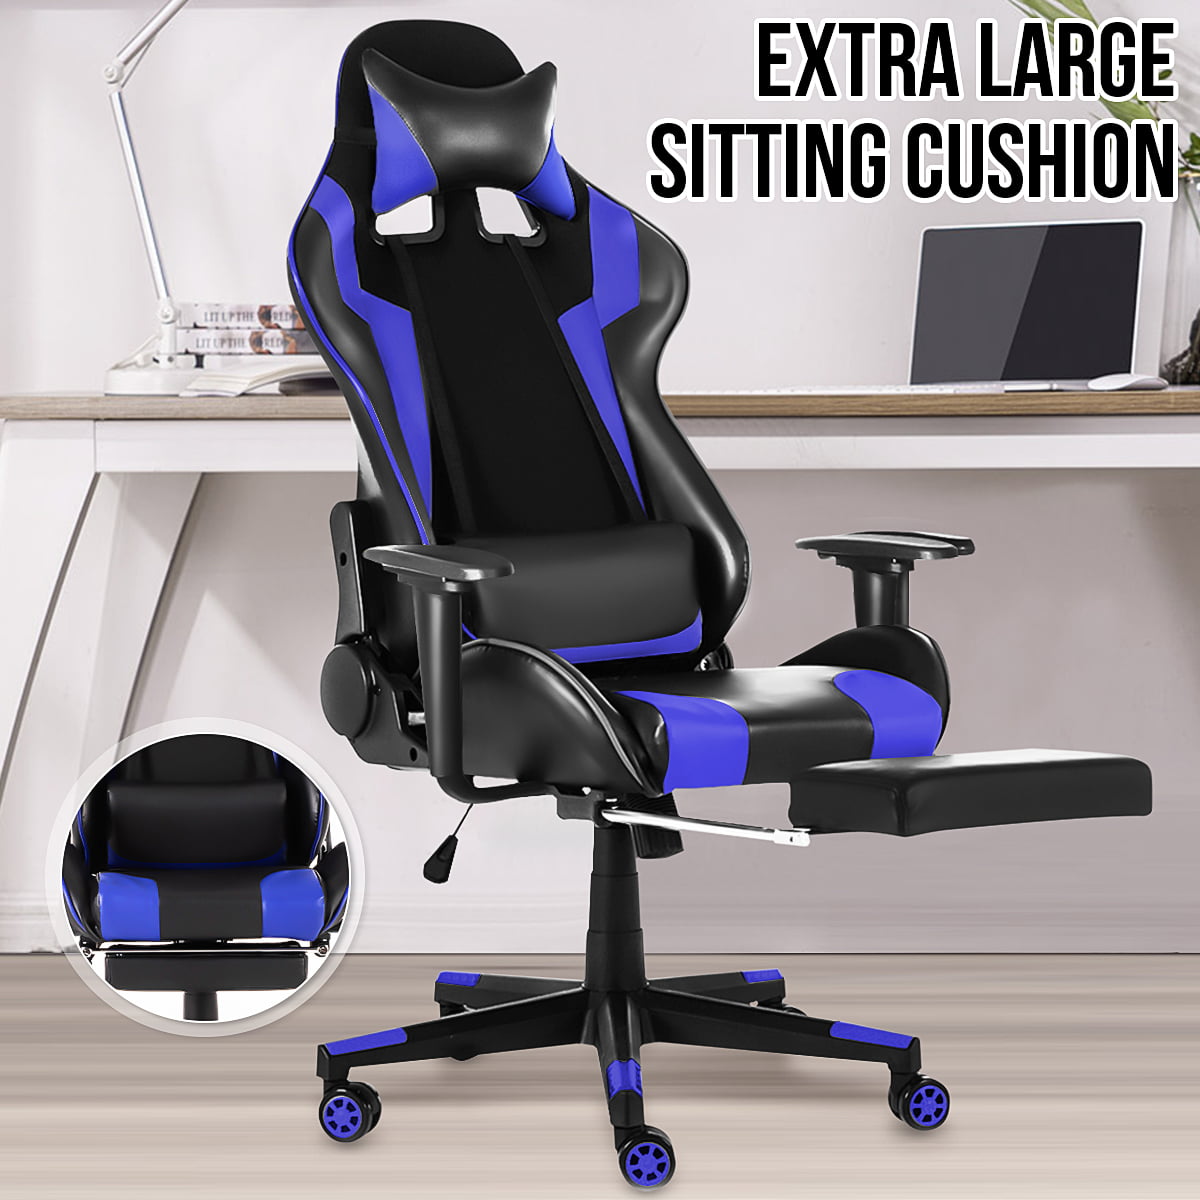 Large Size 40cm Cushion Computer Chair For Adults Ergonomic Pc Gaming Chair High Back Swivel Office Chair Leather Chair Walmart Com Walmart Com